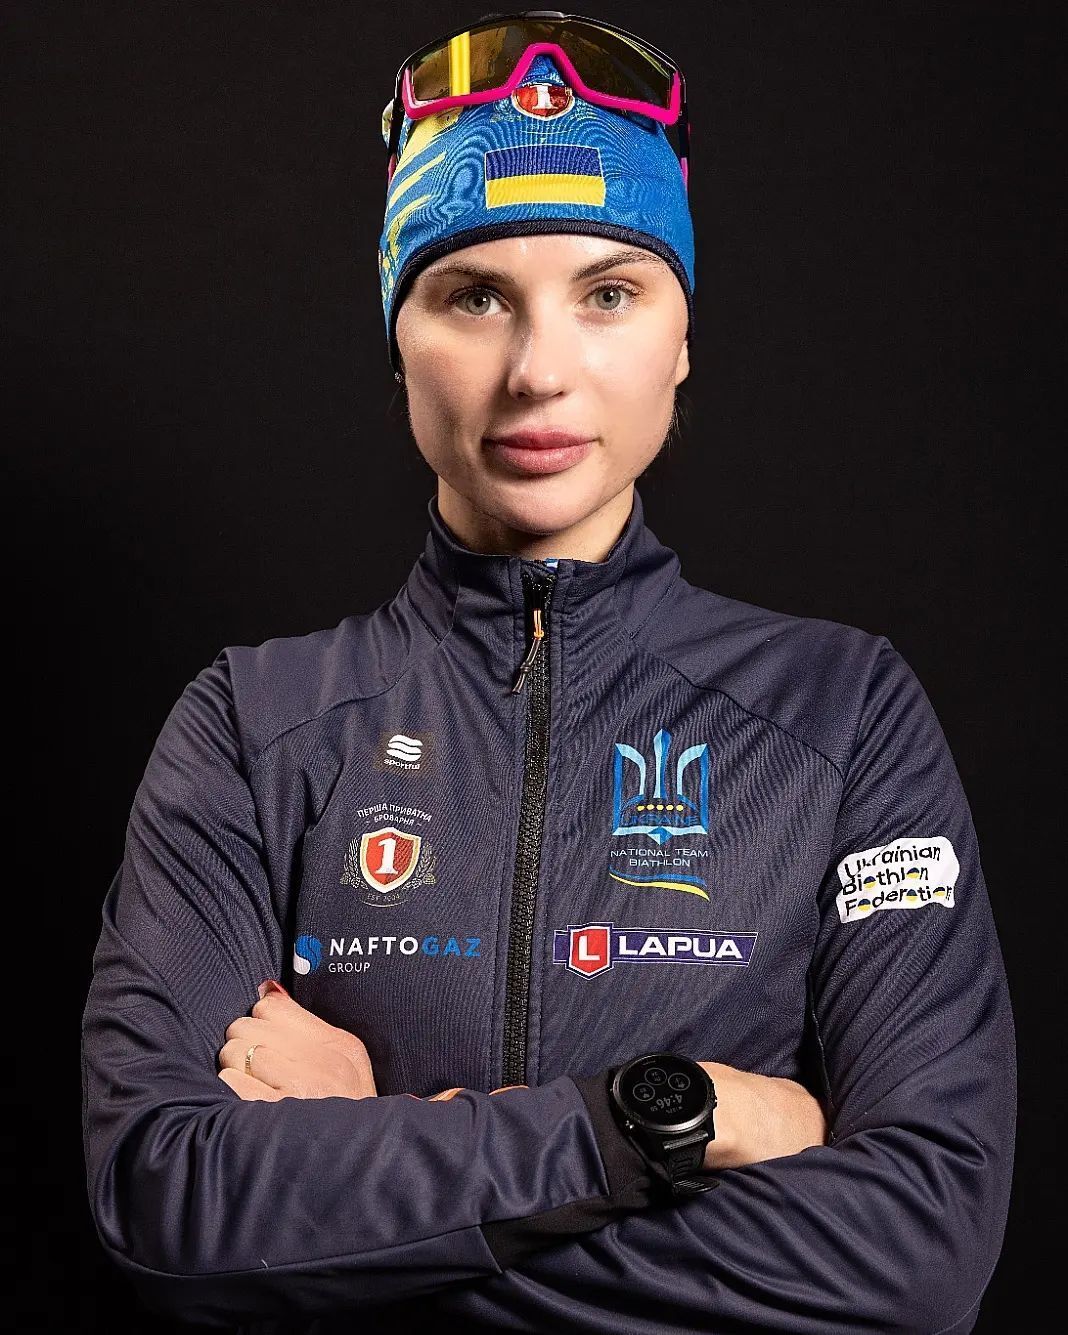 World champion excluded from the Ukrainian biathlon team for the 3rd stage of the World Cup